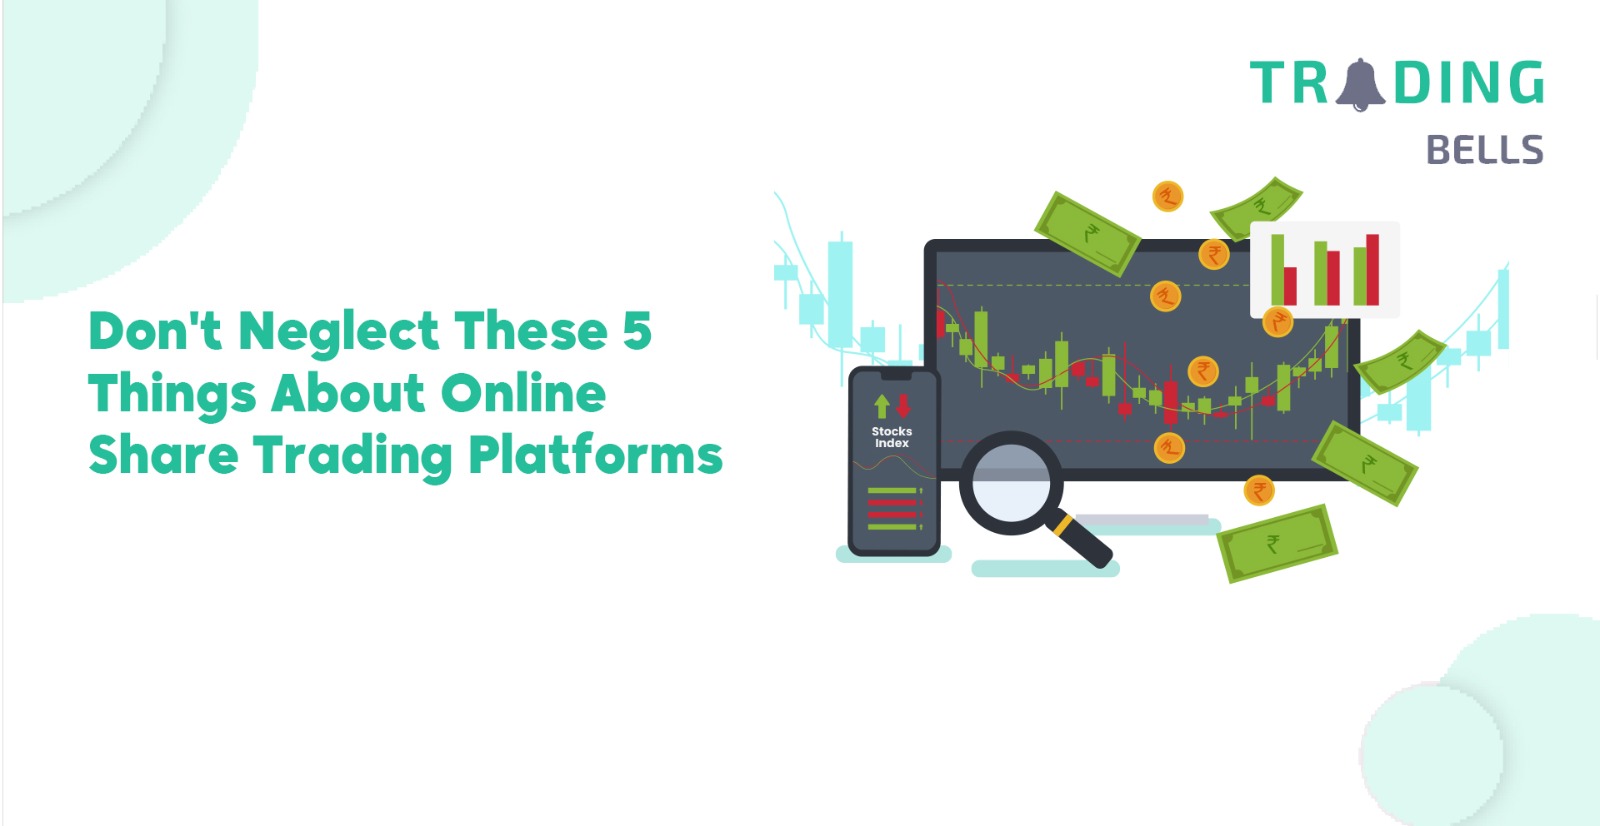 Don't Neglect These 5 Things About Online Share Trading Platforms